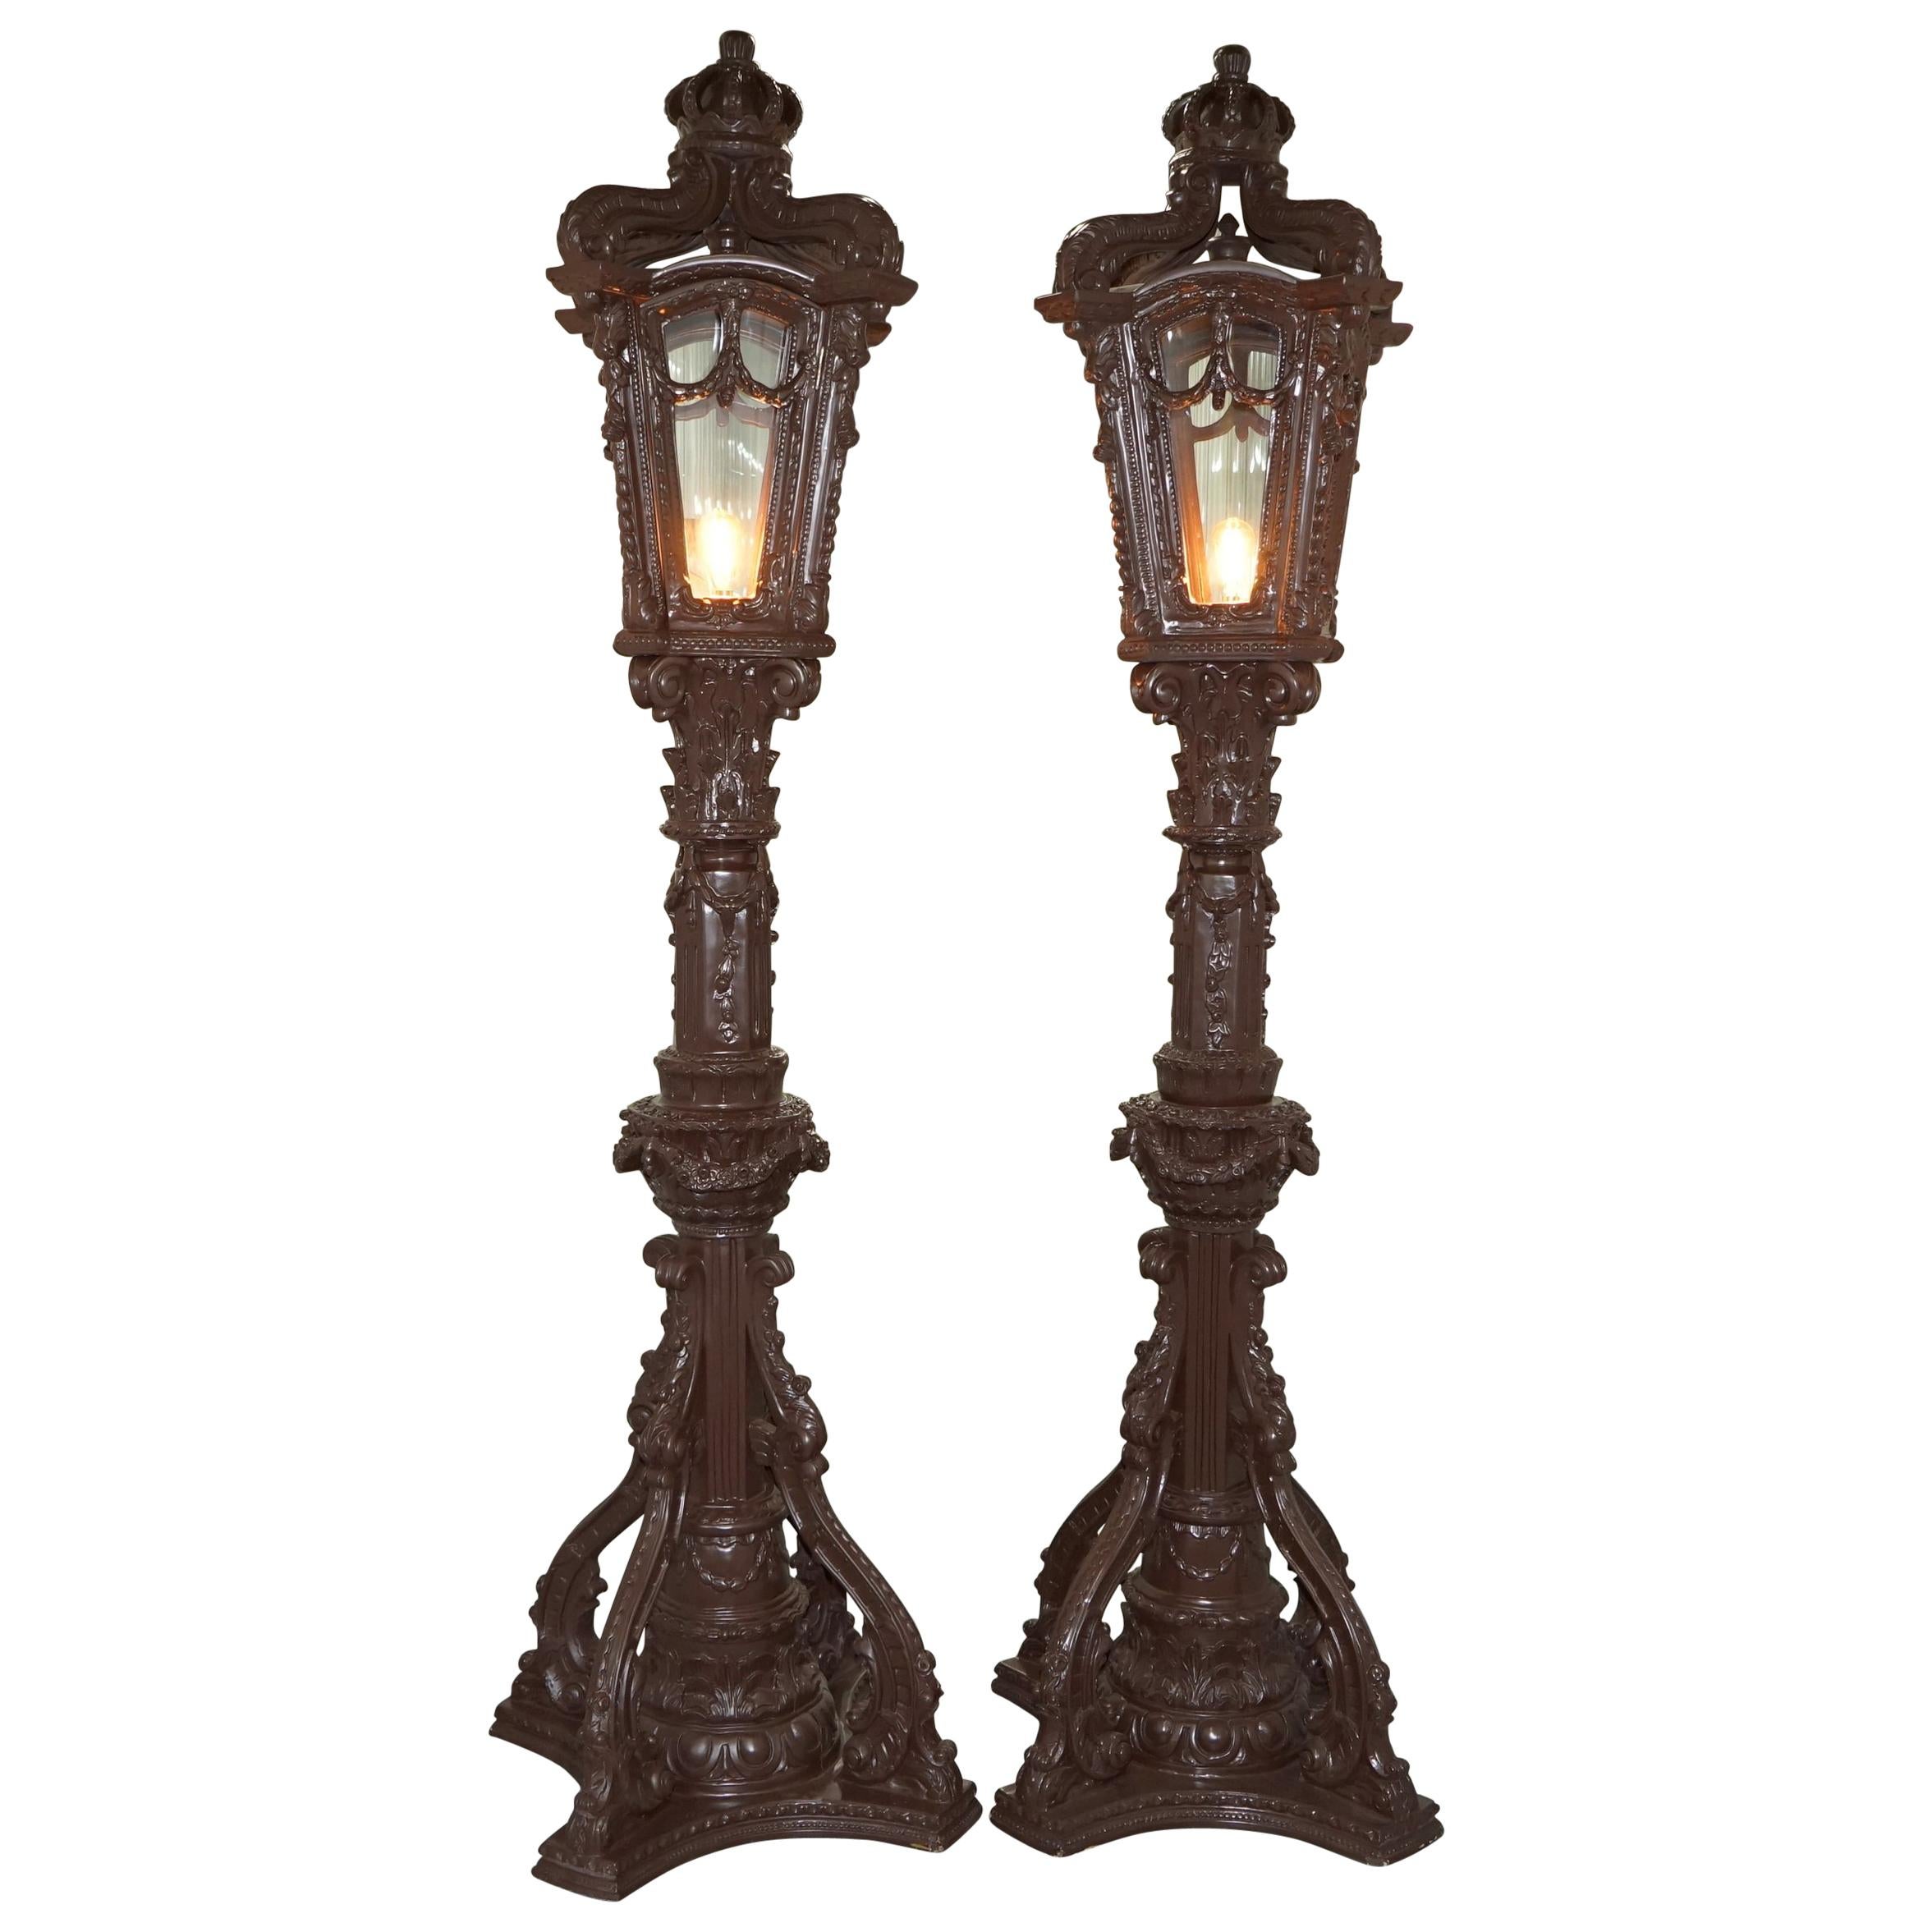 Pair of Huge Tall Victorian Style Street Lamps Fully Working Art Pieces